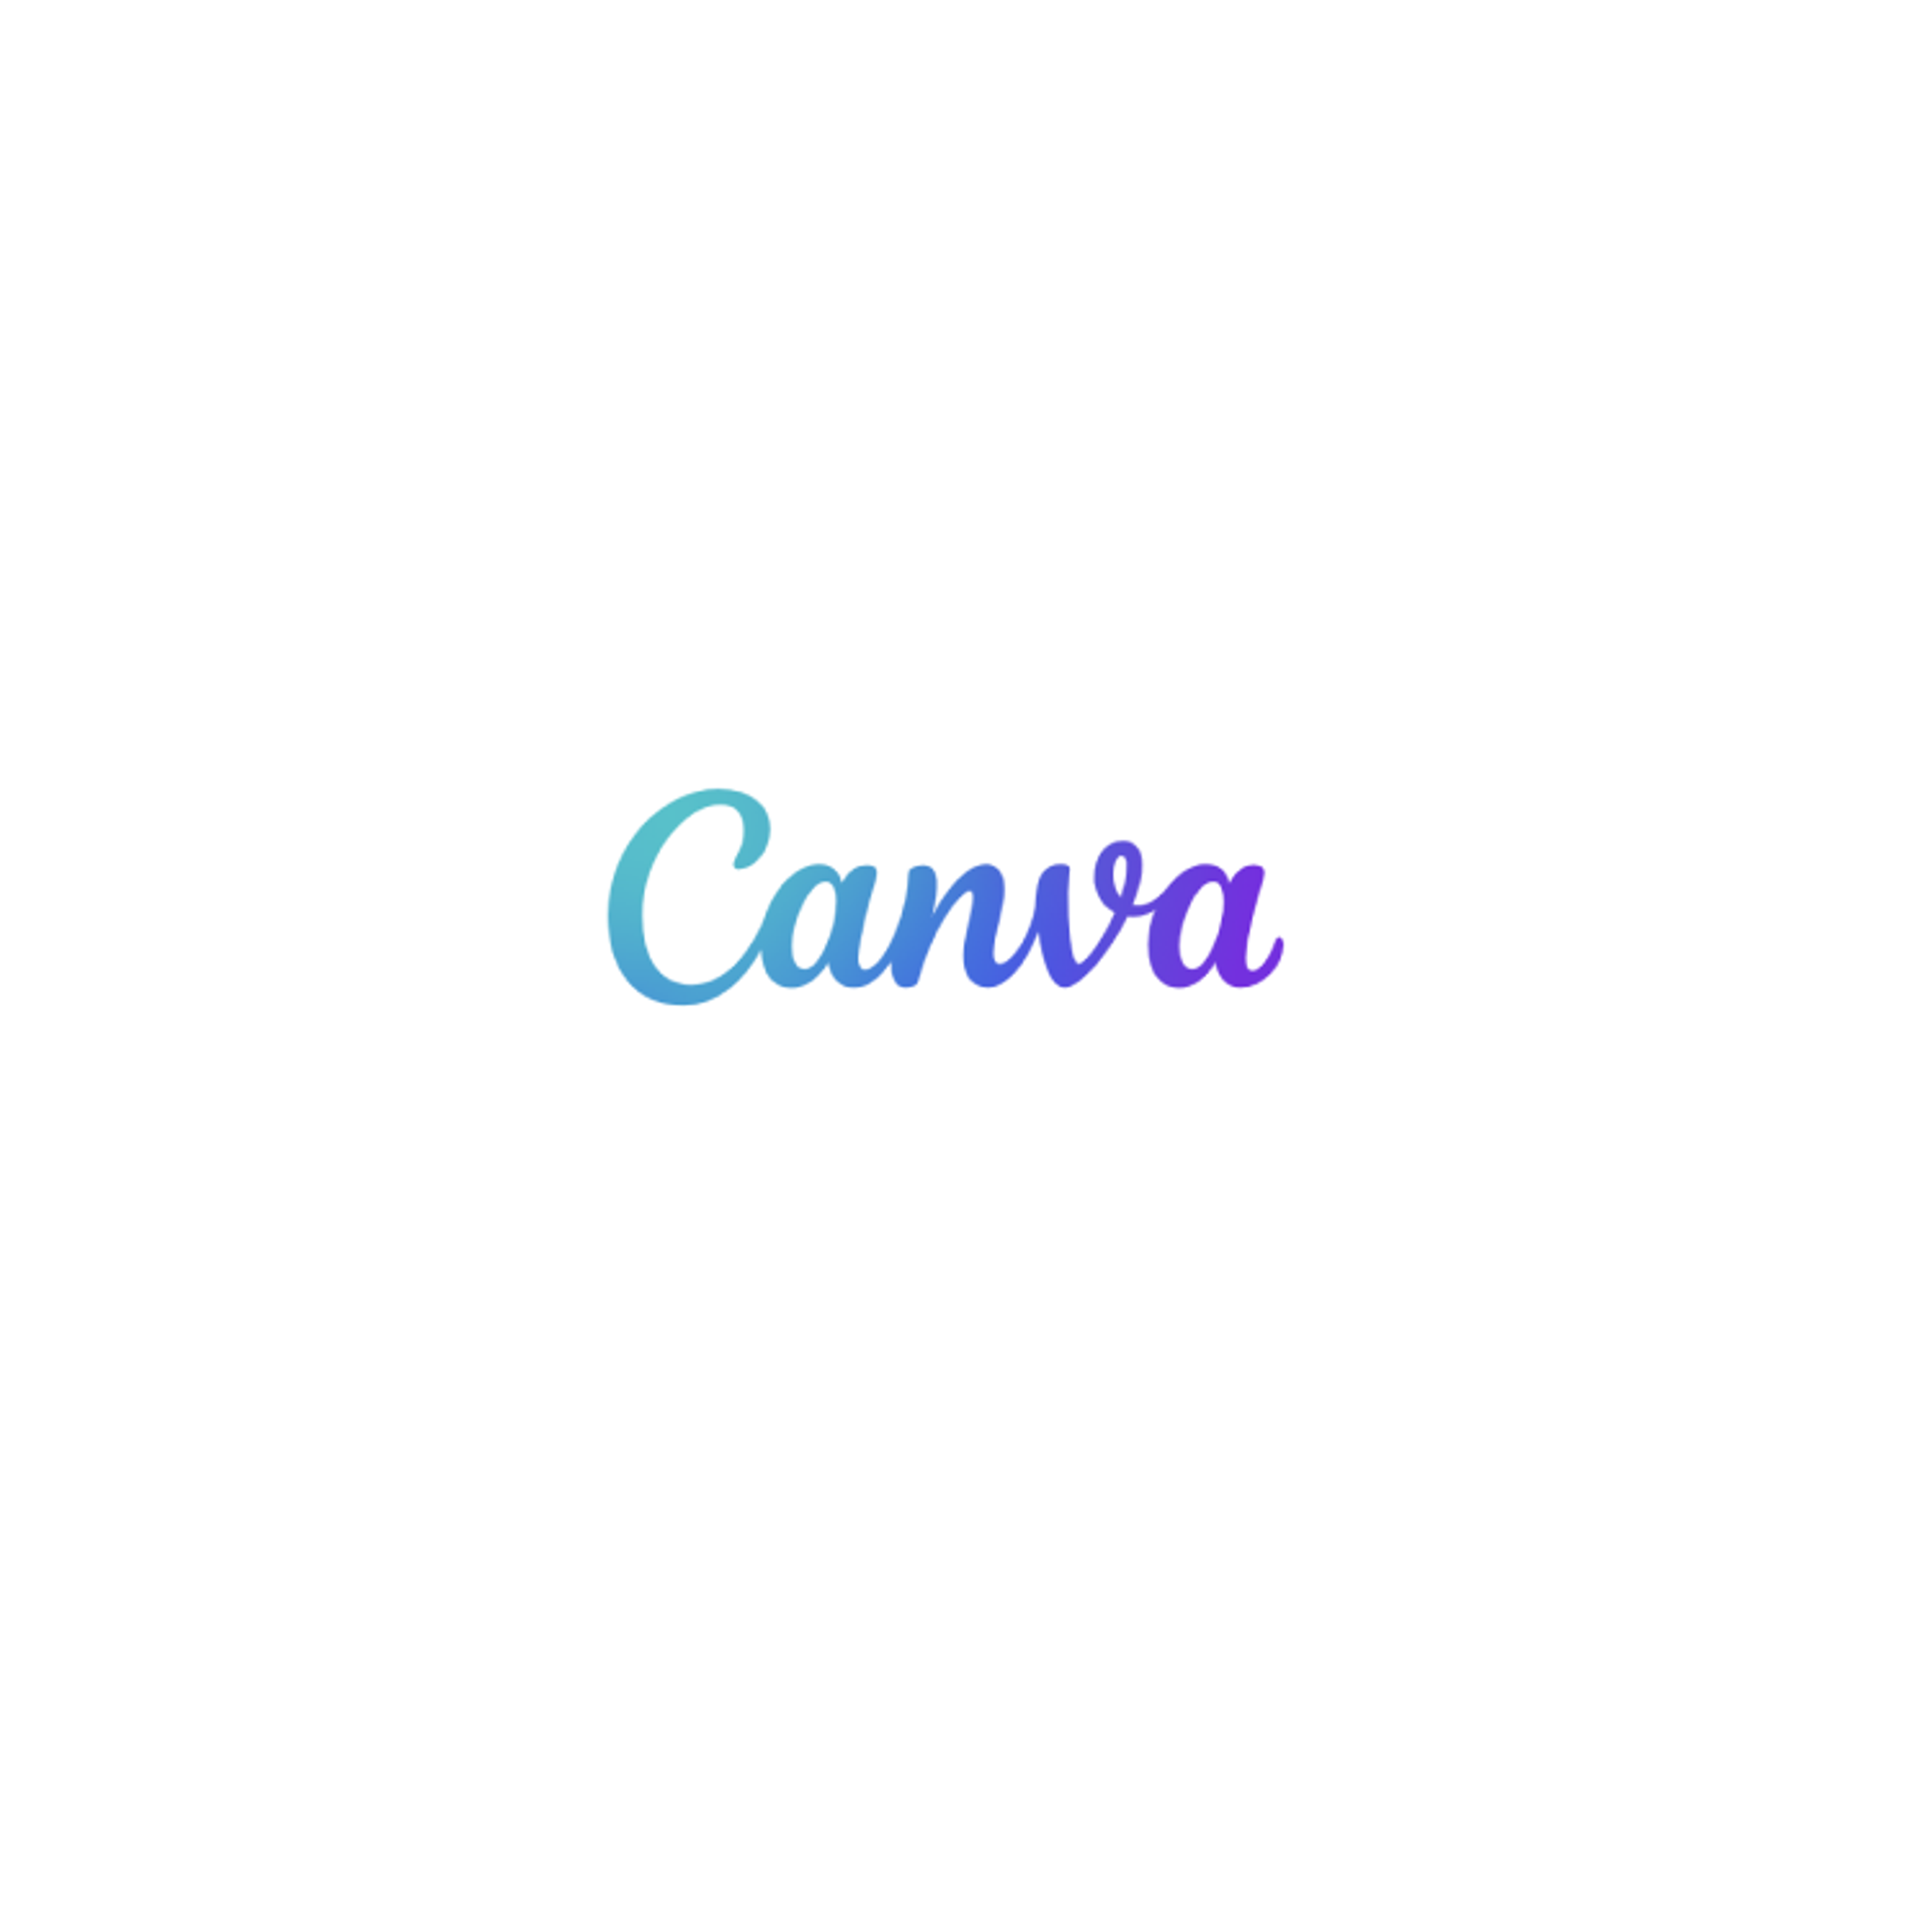 Canva Text to Image